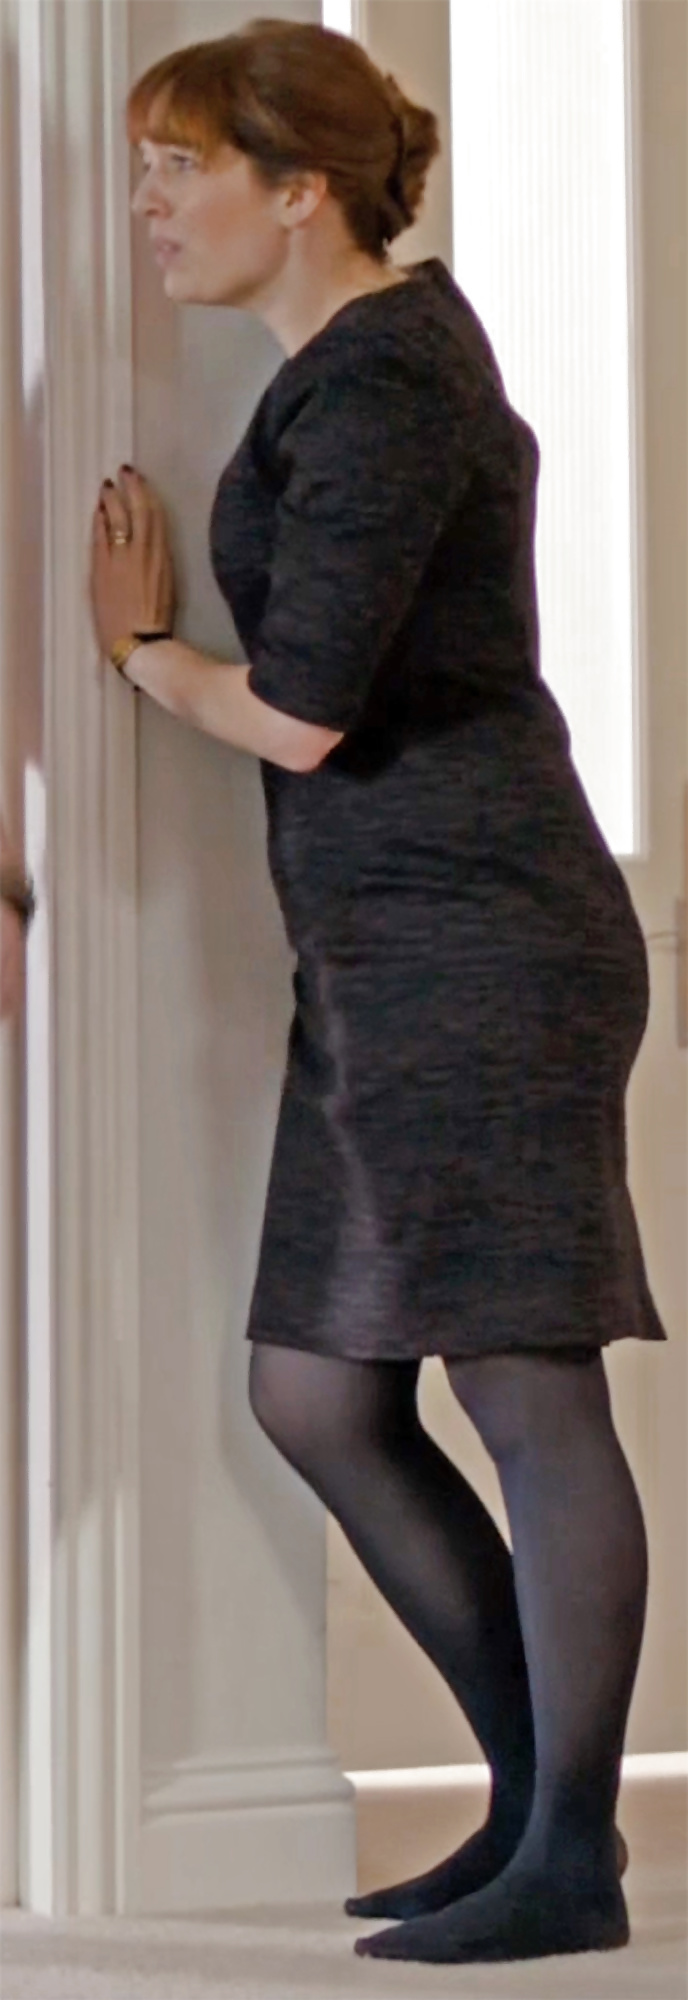 Sex Gallery Katherine Parkinson (IT Crowd, Humans) In TIghts Pantyhose